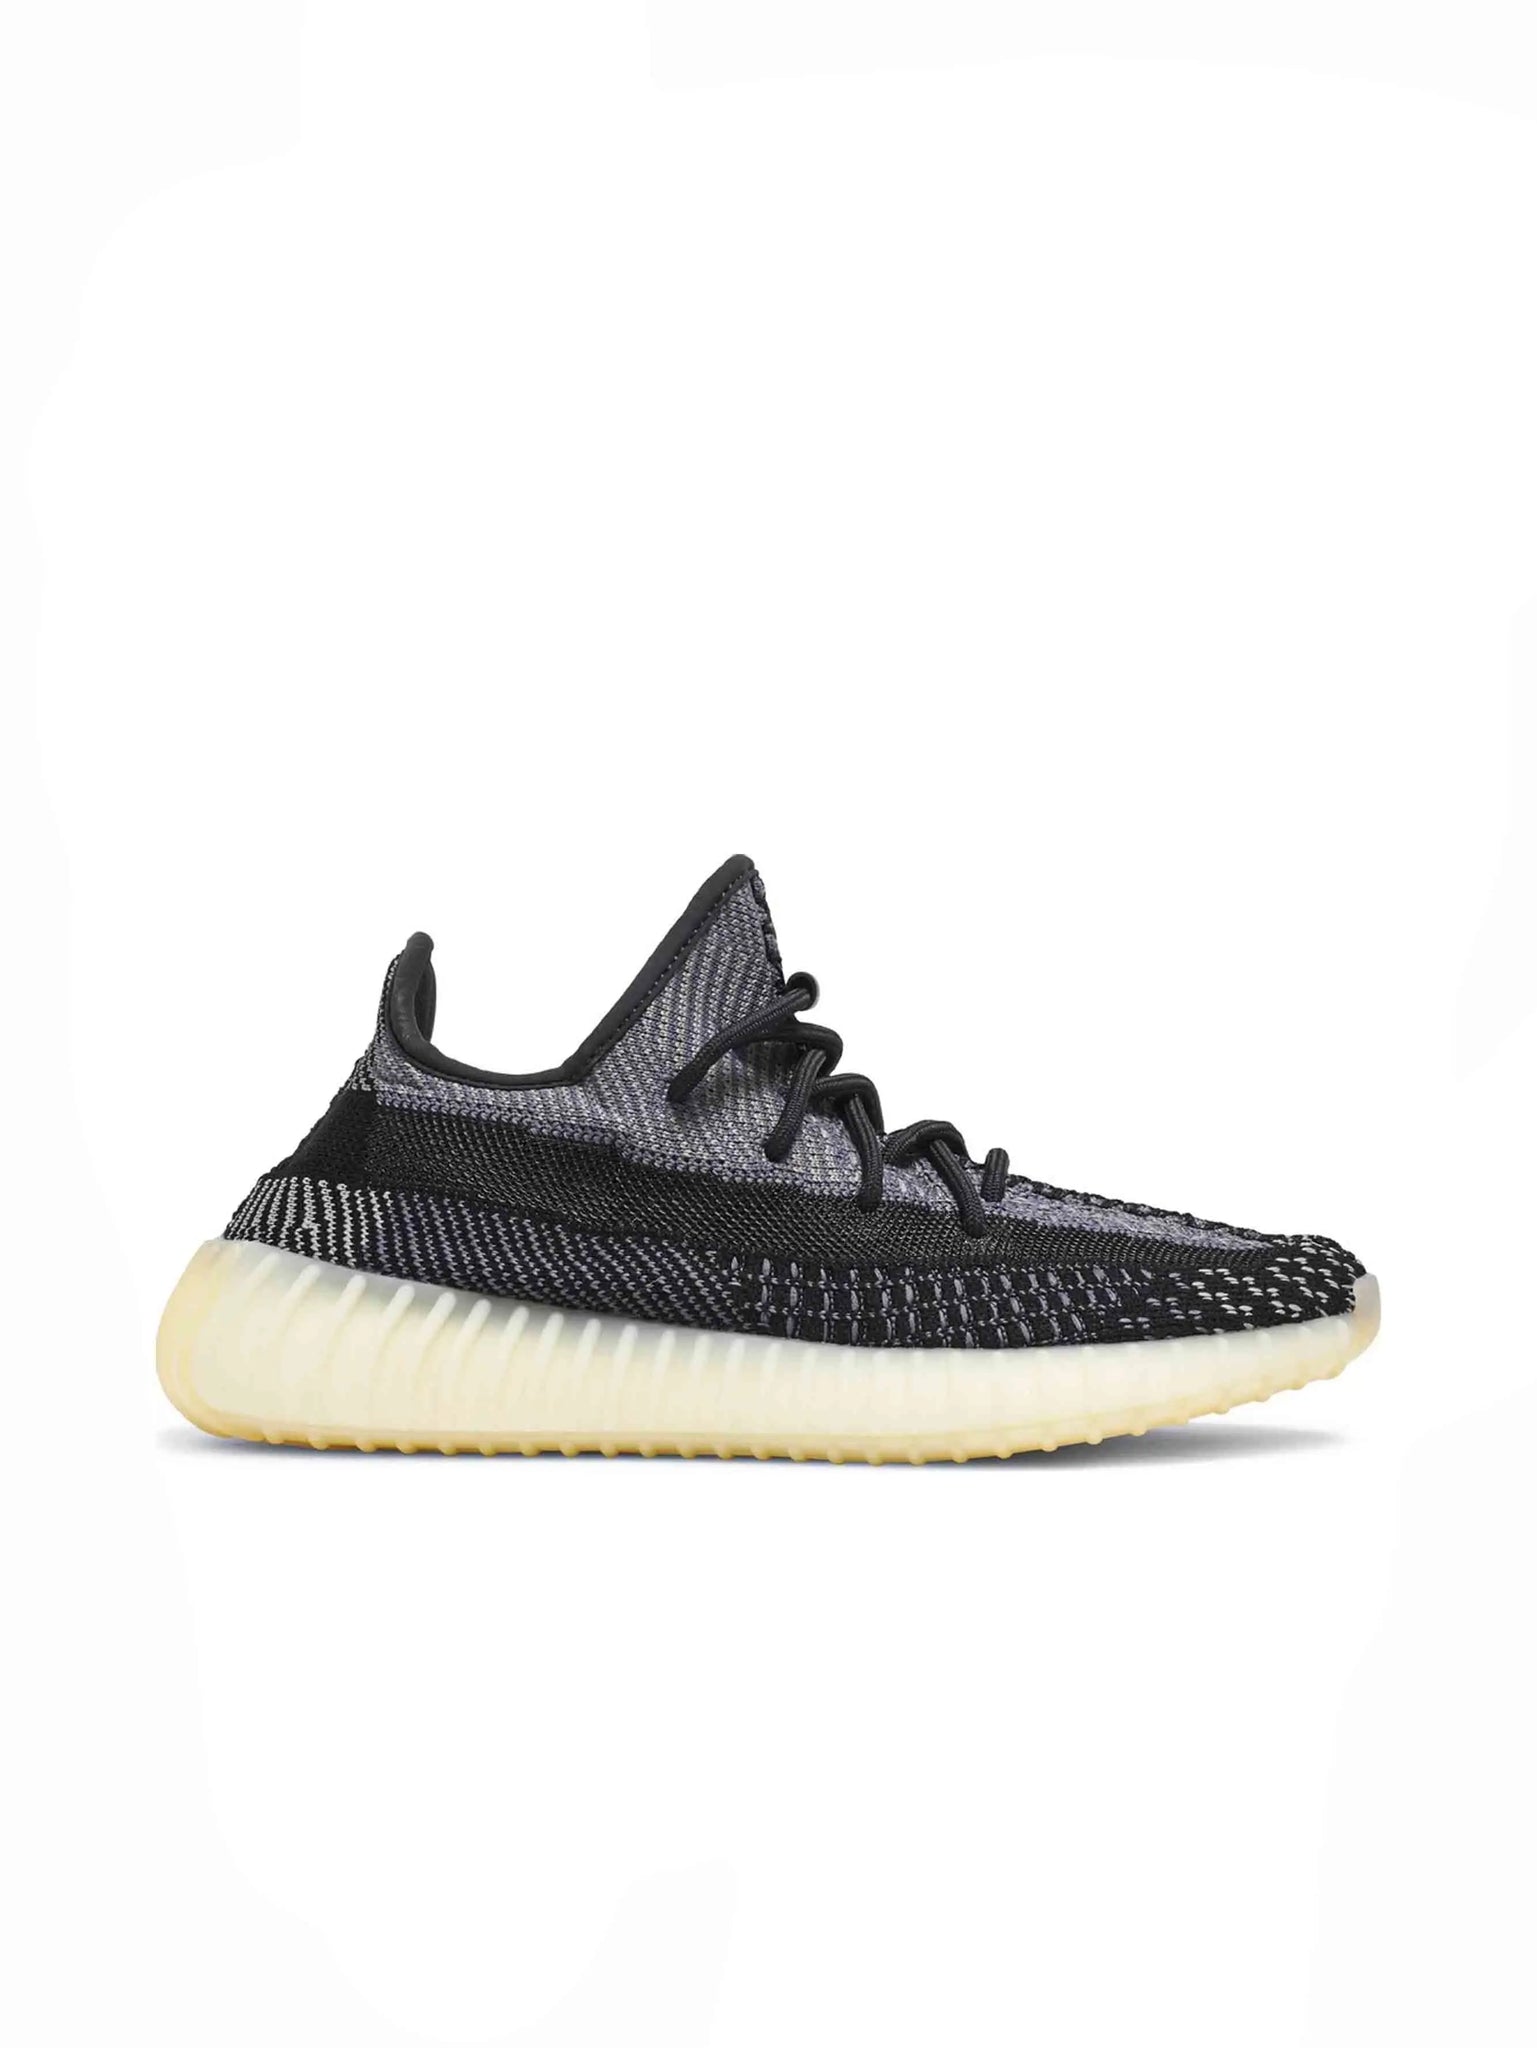 adidas Yeezy Boost 350 V2 Carbon in Auckland, New Zealand - Shop name